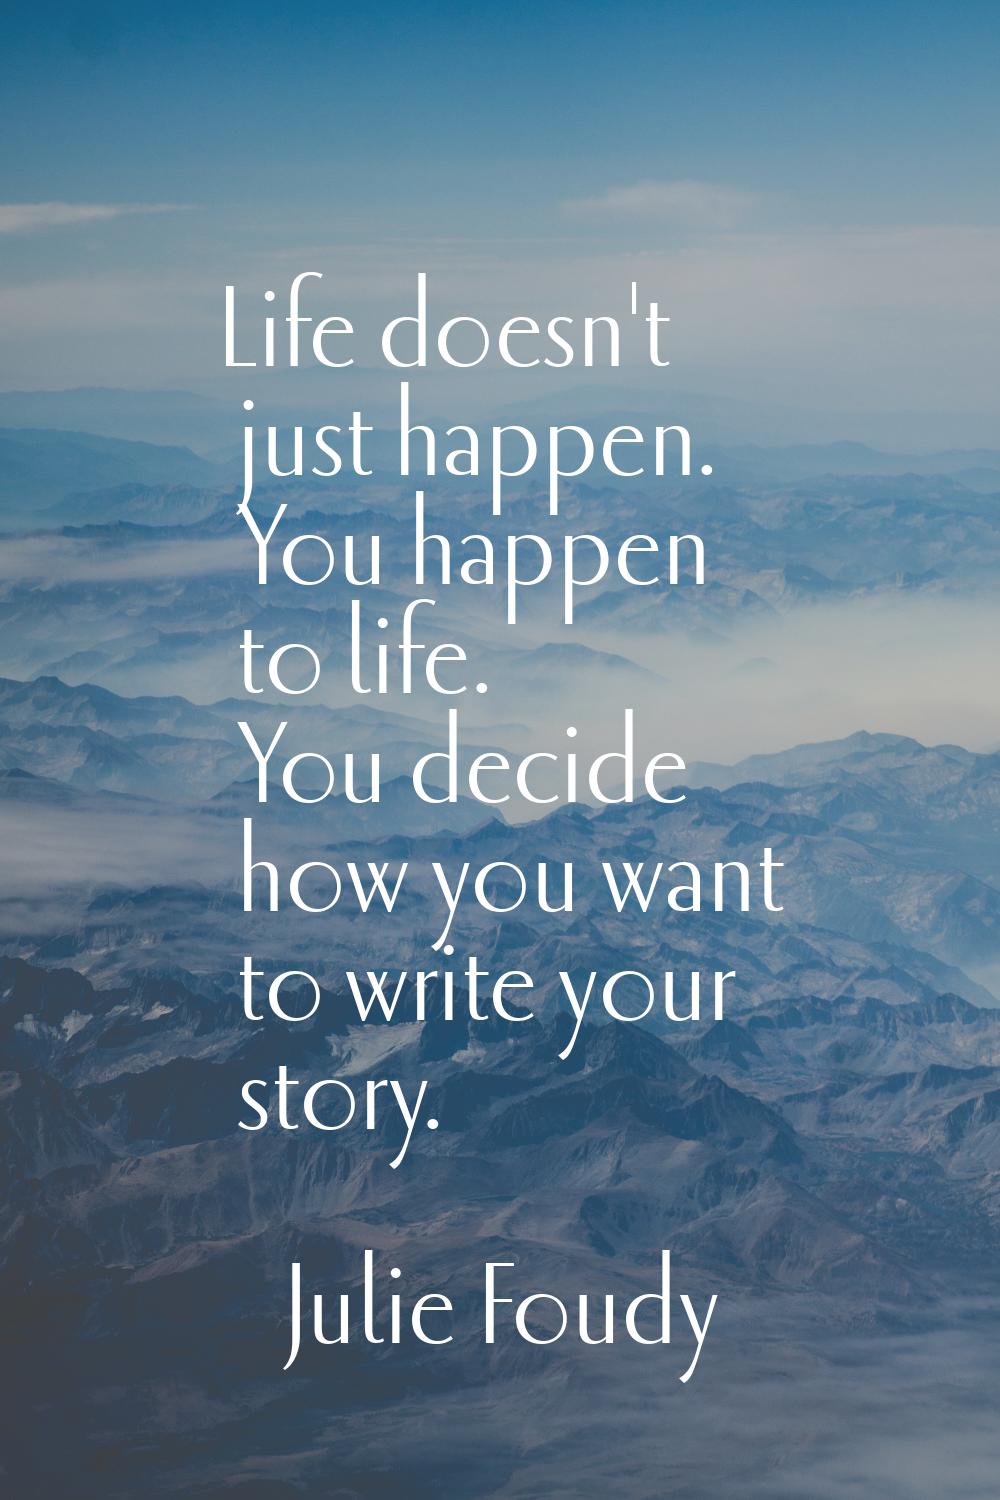 Life doesn't just happen. You happen to life. You decide how you want to write your story.